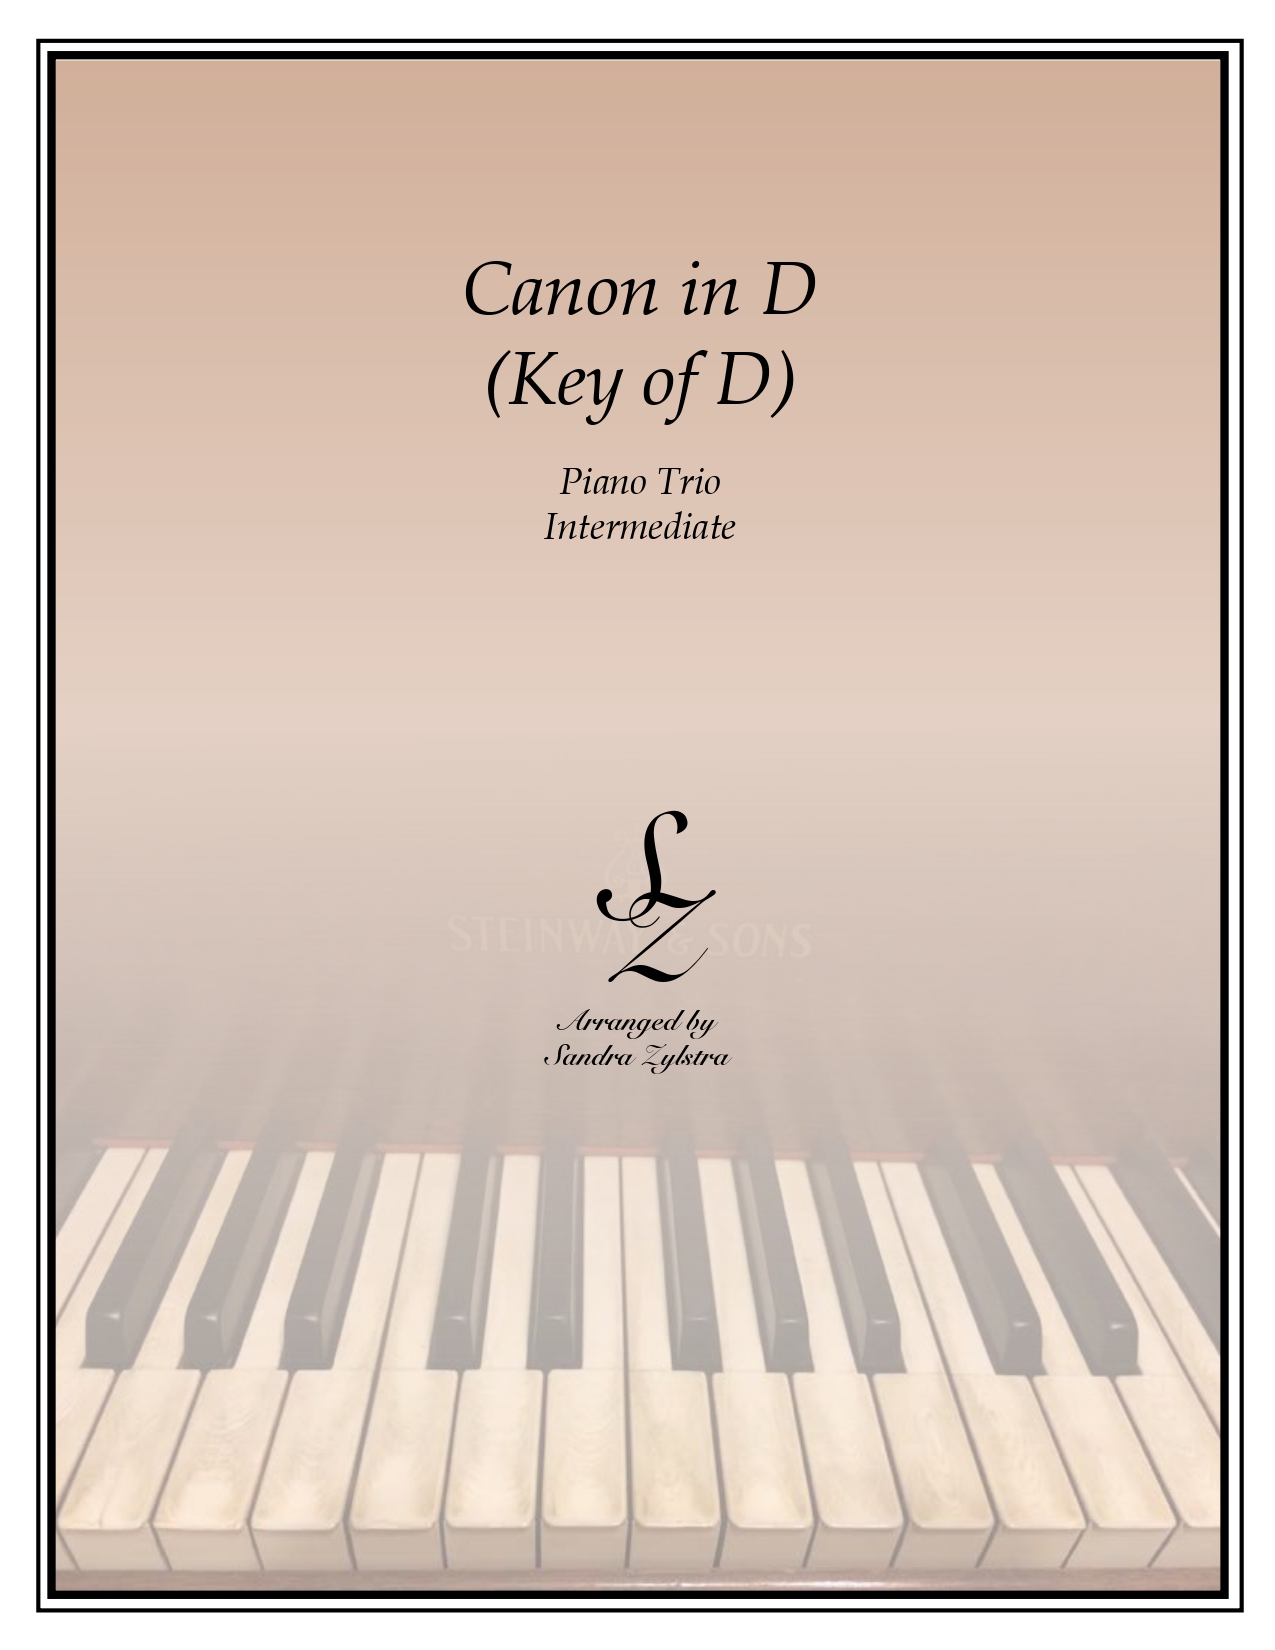 Canon In D key of D trio parts cover page 00011